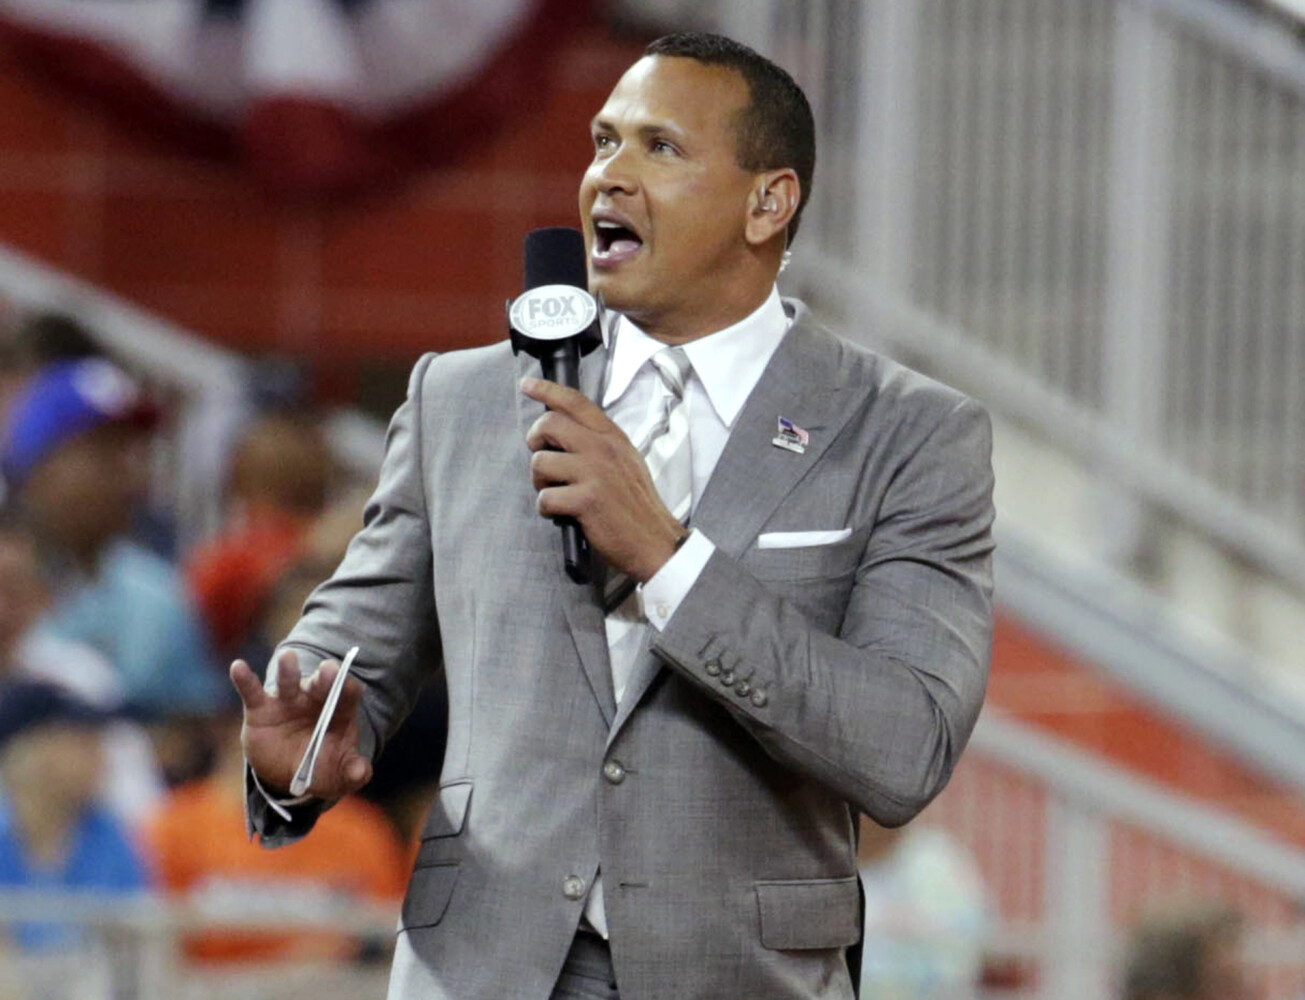 A-Rod, Lore to buy Minnesota Timberwolves, Lynx - Arena Digest